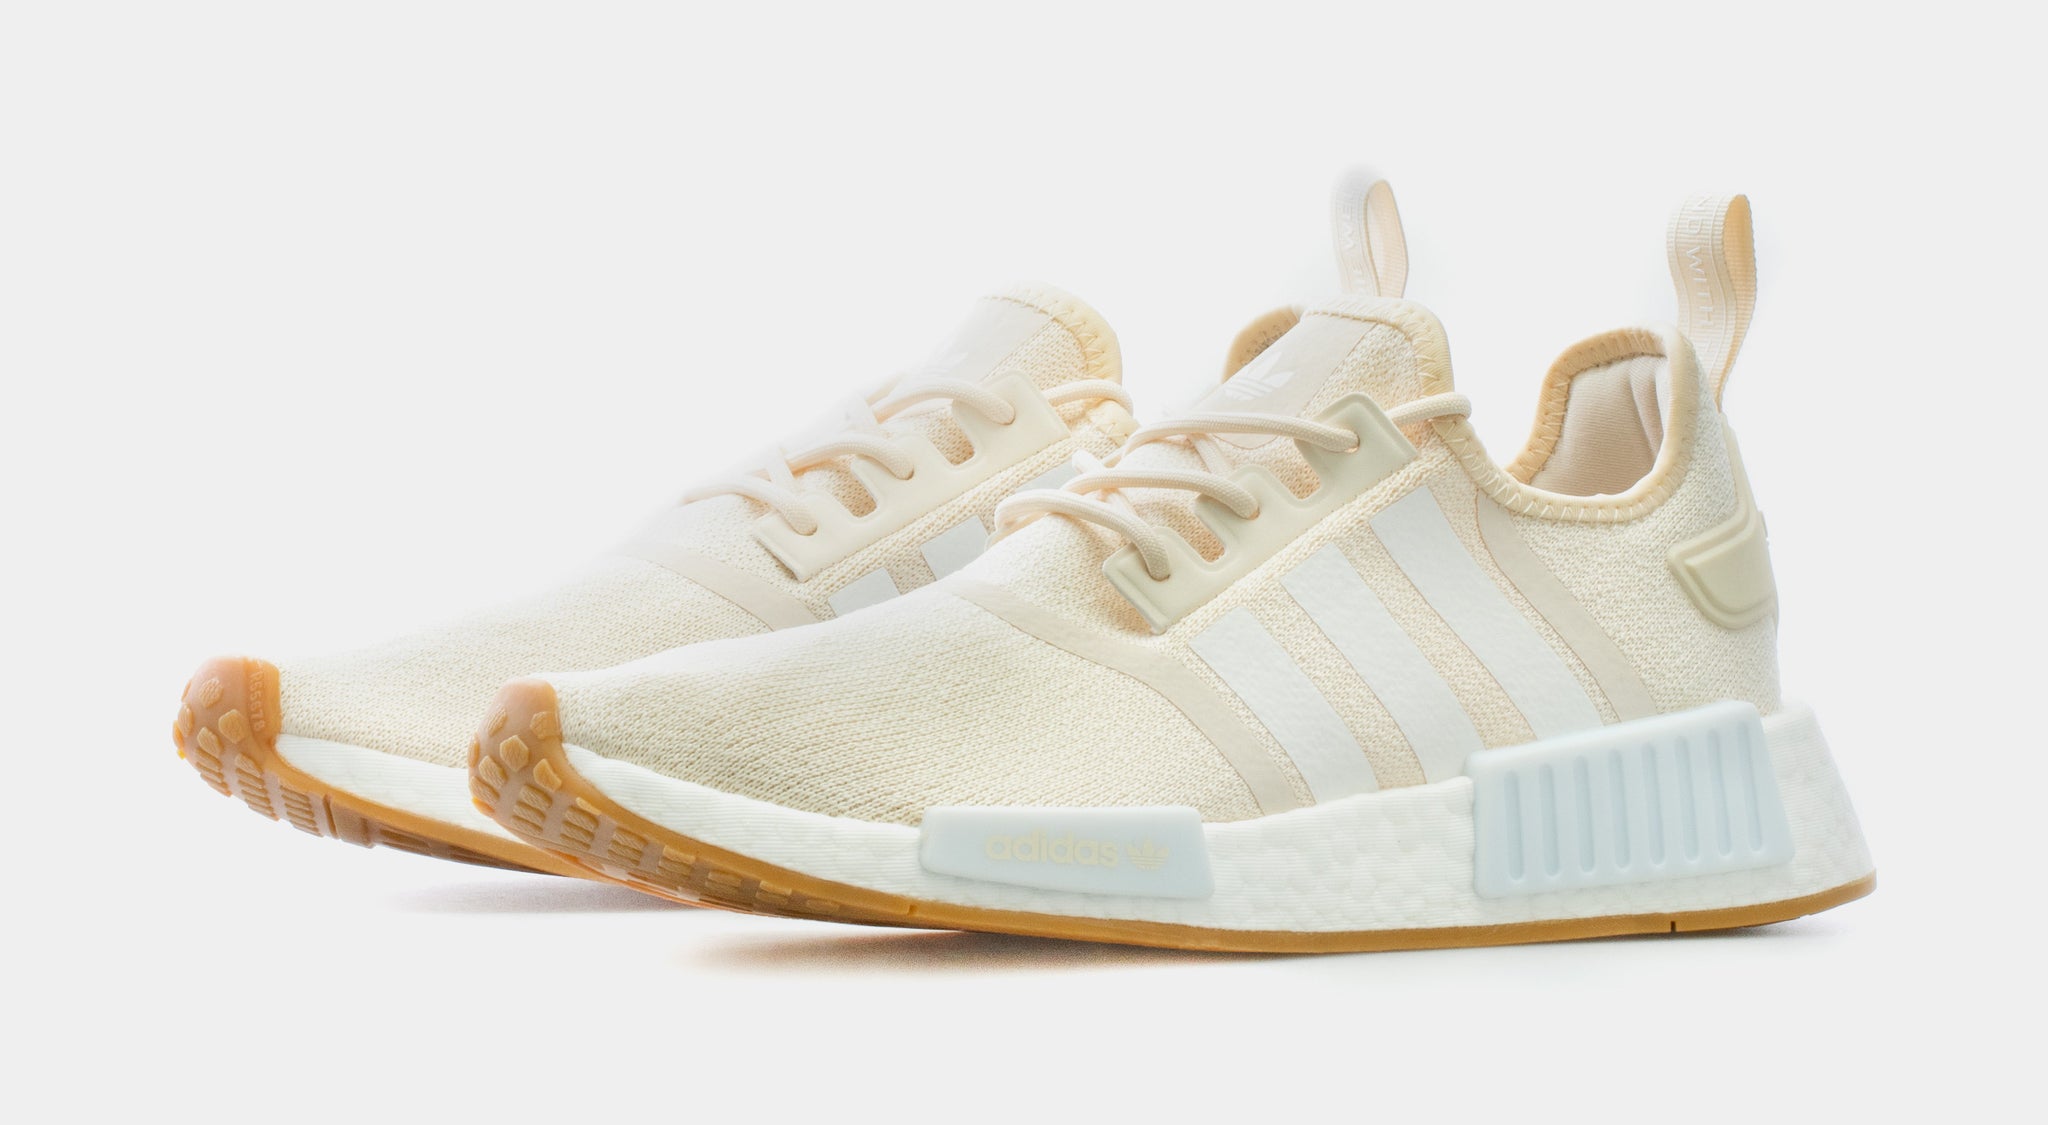 entrevista superávit Escabullirse adidas NMD R1 Mens Running Shoes Beige GY6058 – Shoe Palace